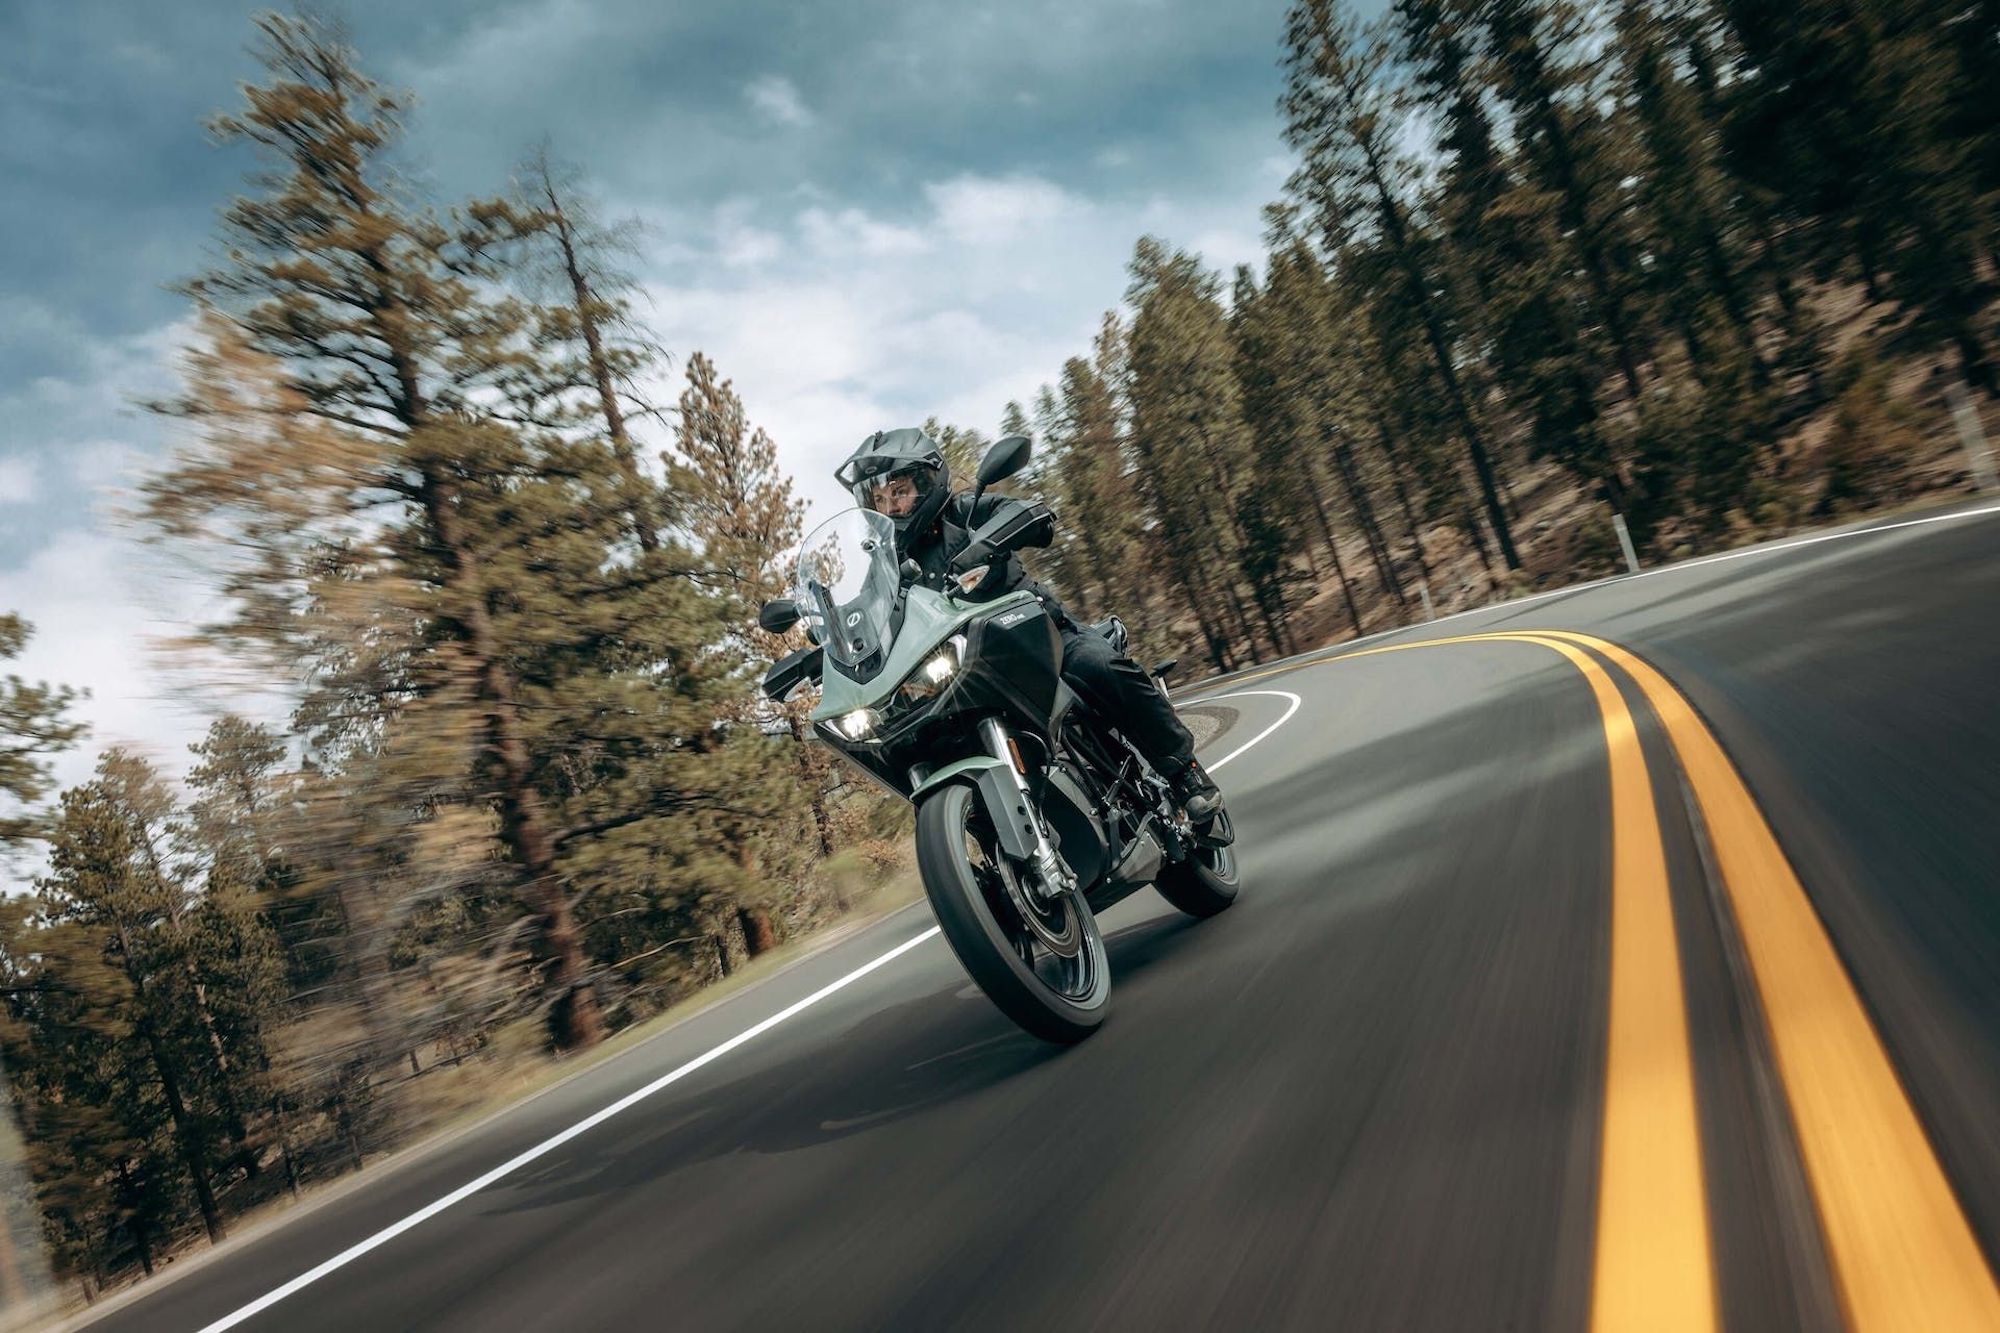 Zero Motorcycles' DSR/X. Media sourced from Live USA Today.